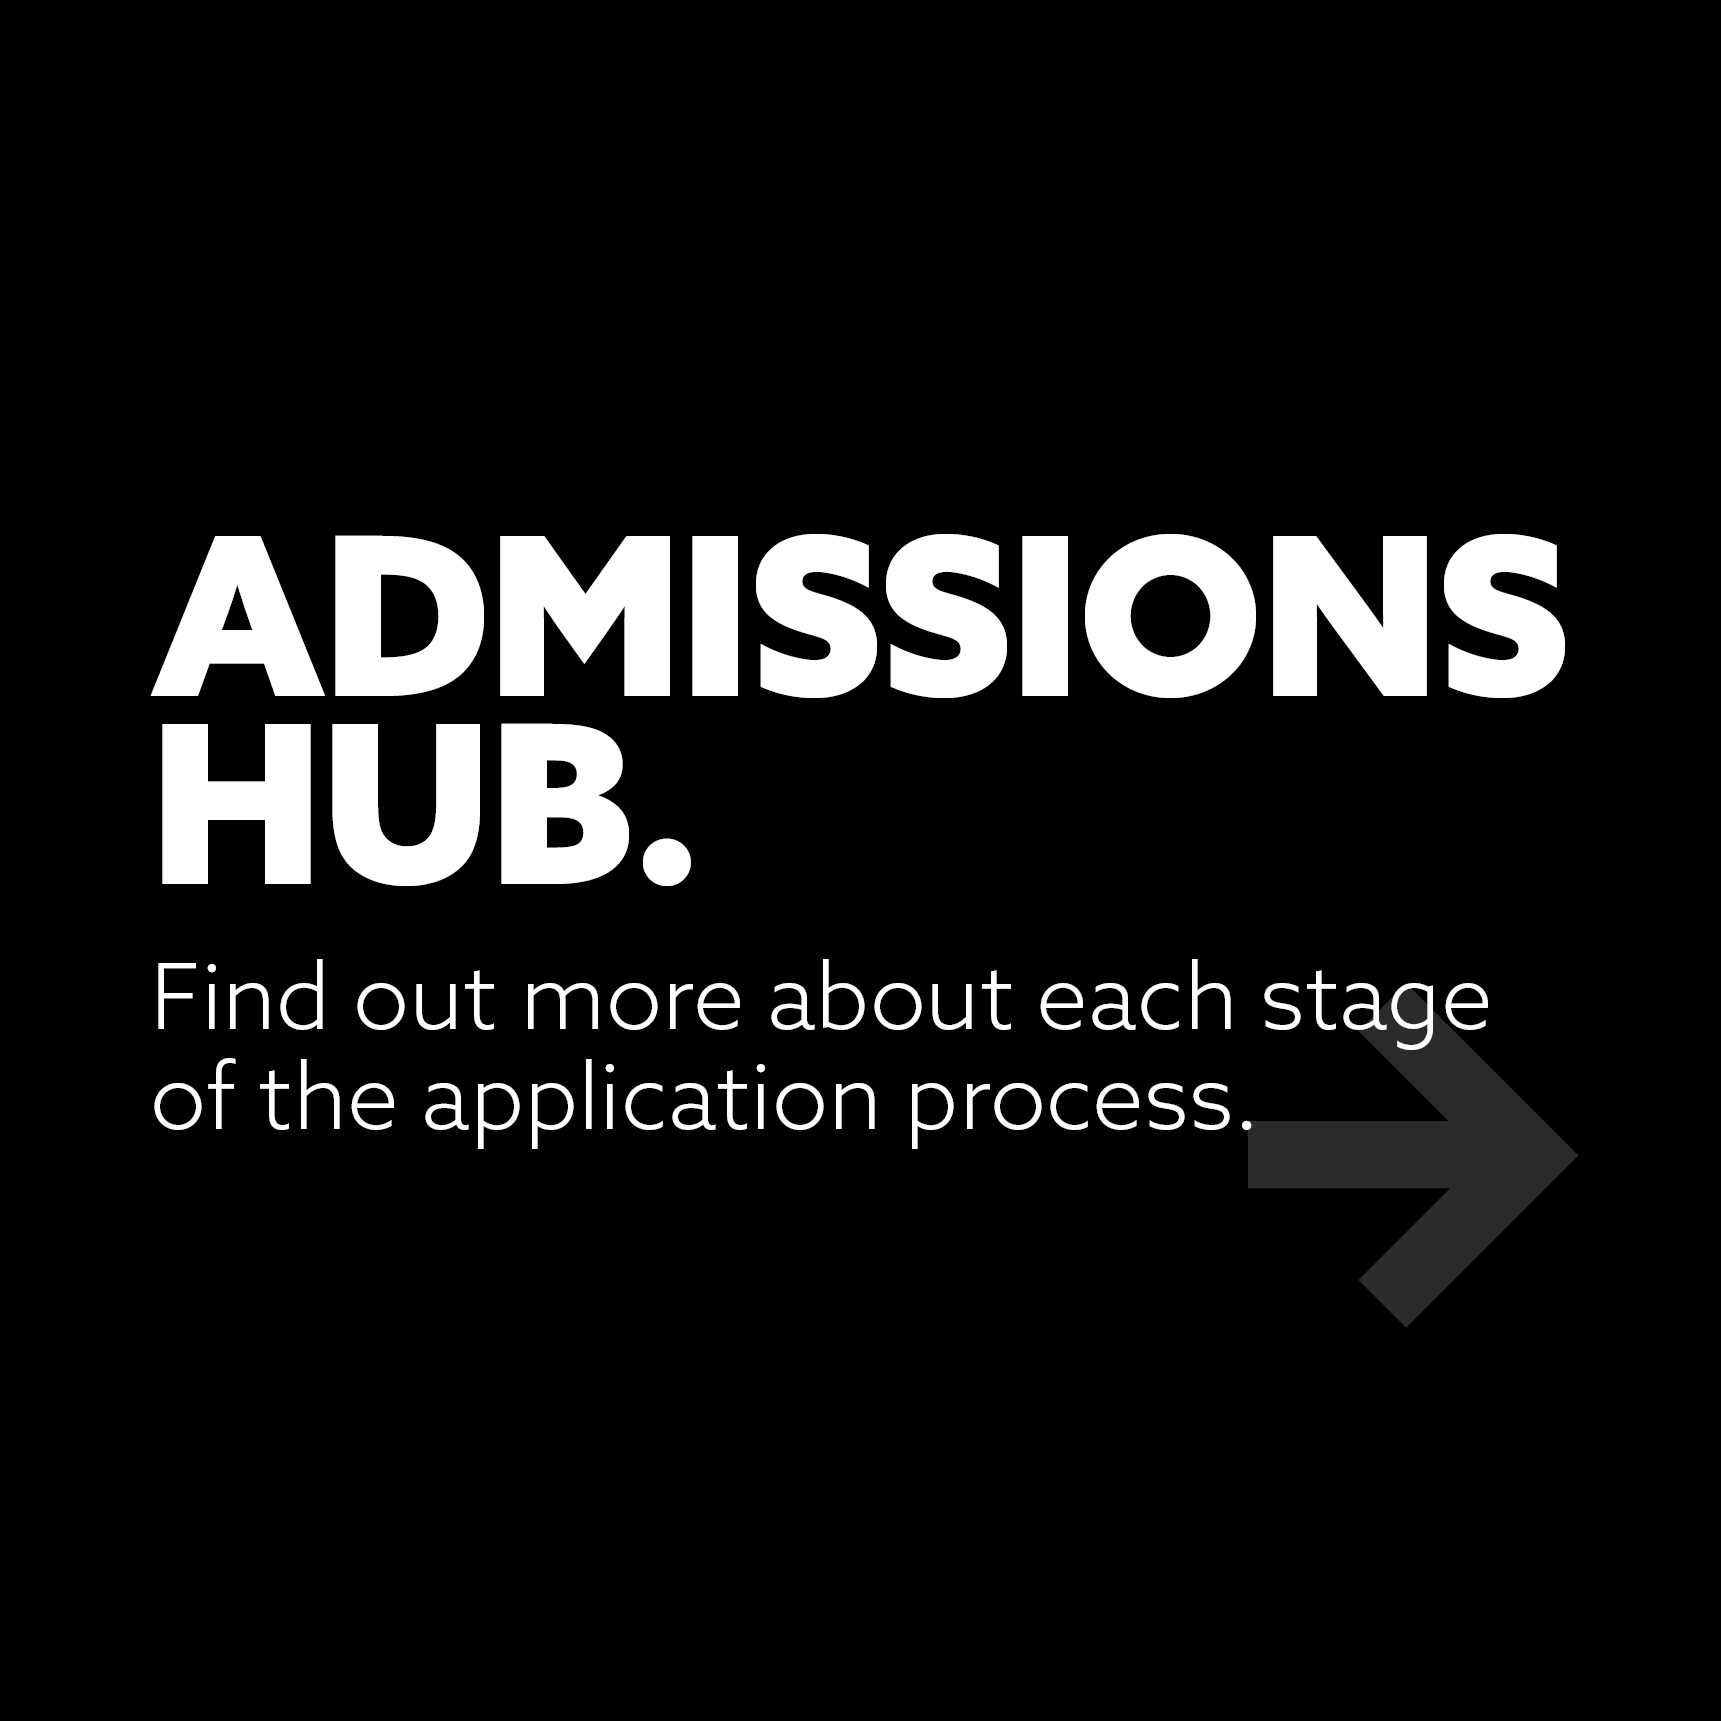 admissions hub find out more about each stage of the application process